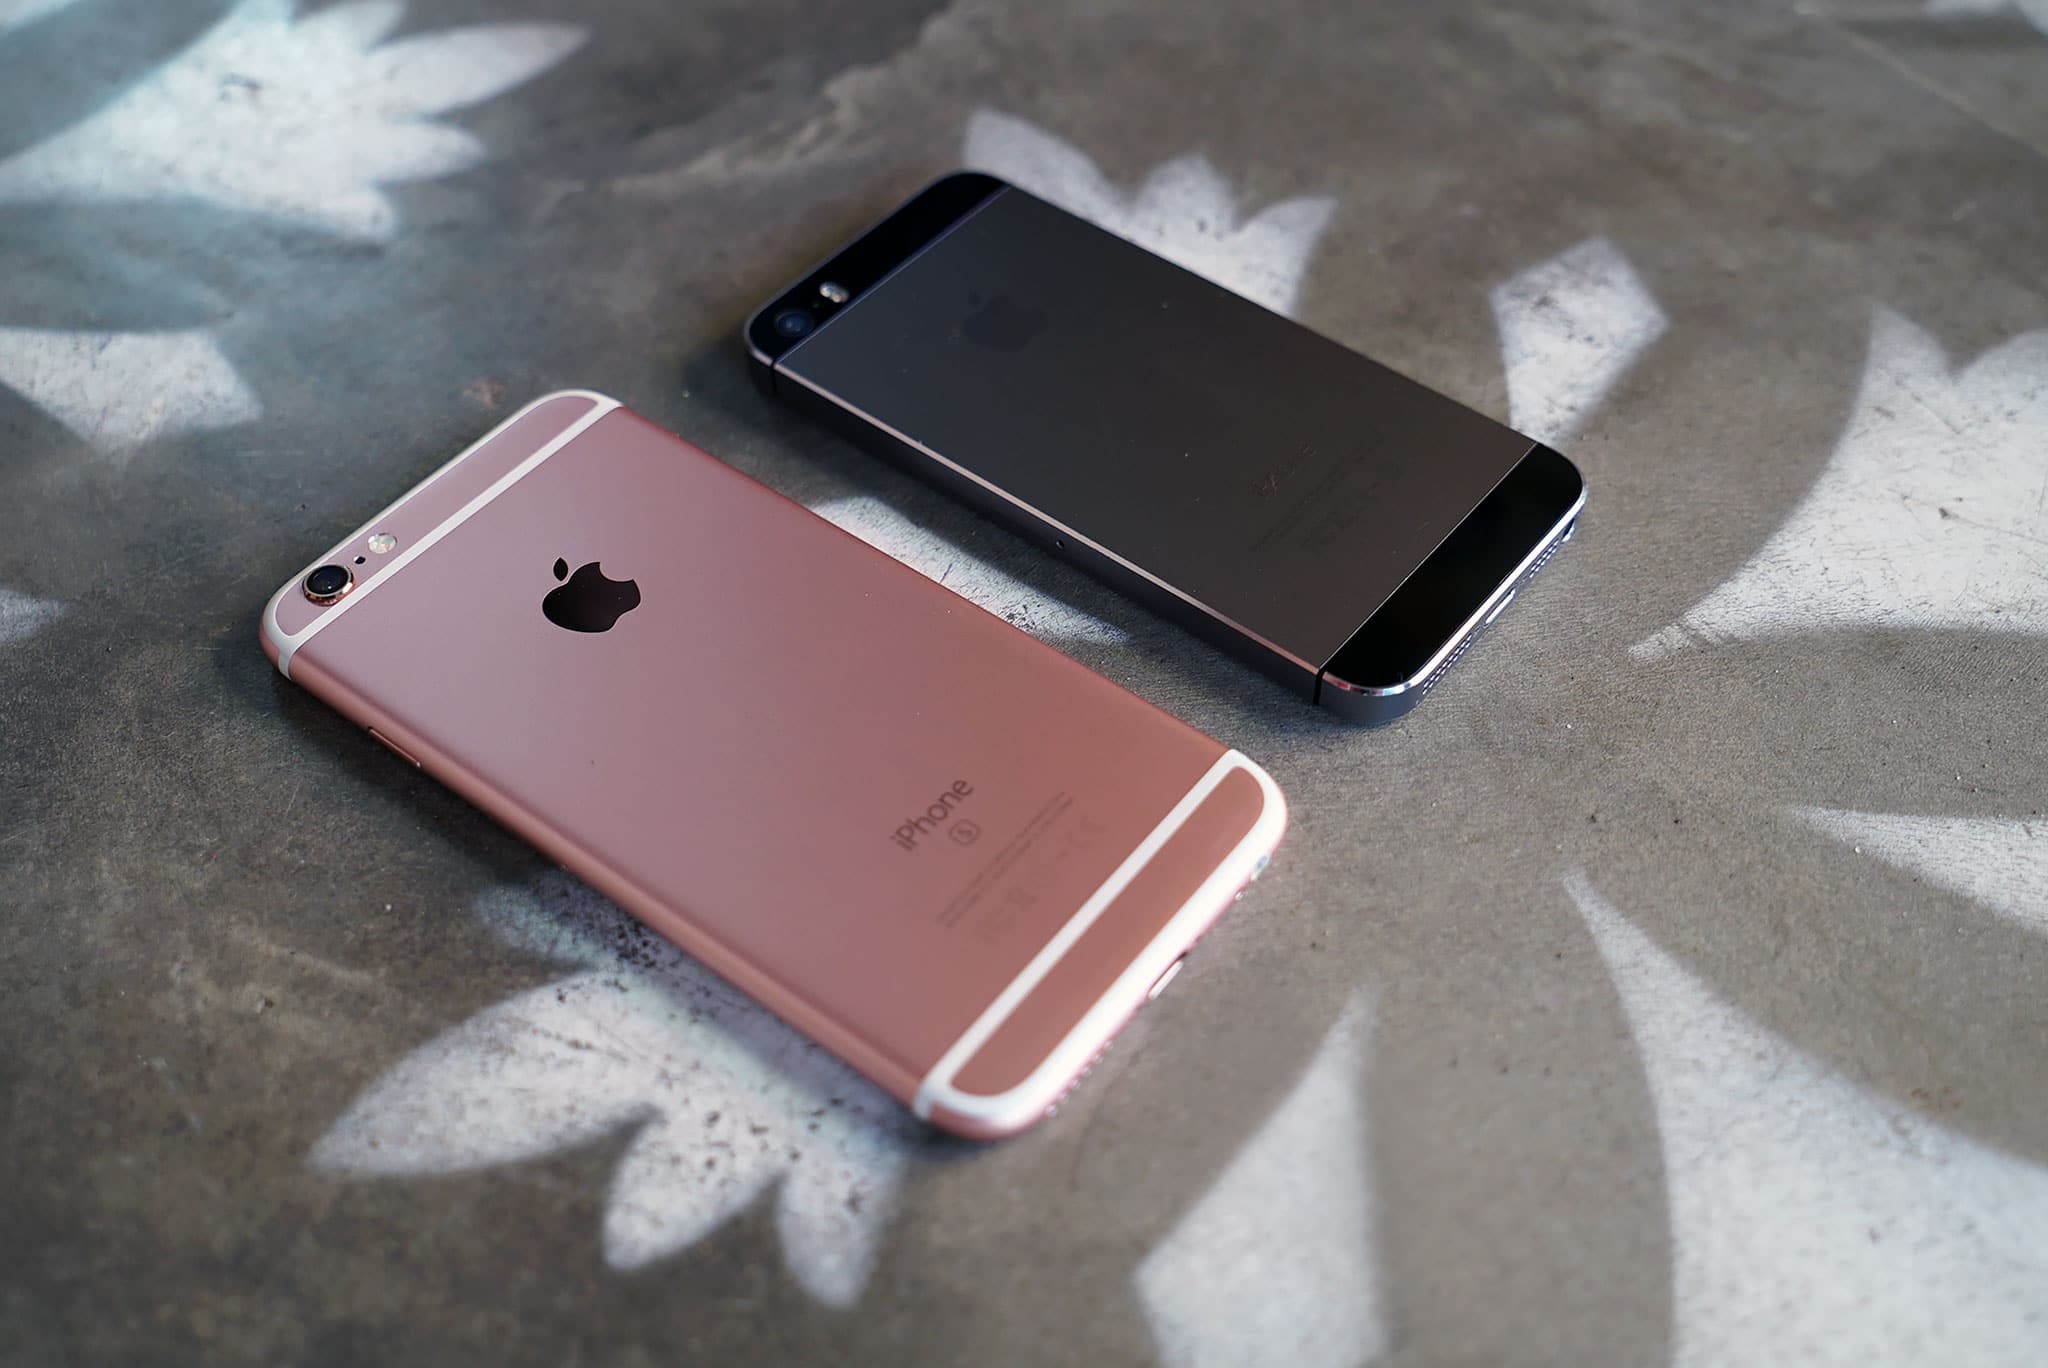 The iPhone 5SE will sport the same form factor as the iPhone 5S not the newer iPhone 6S.